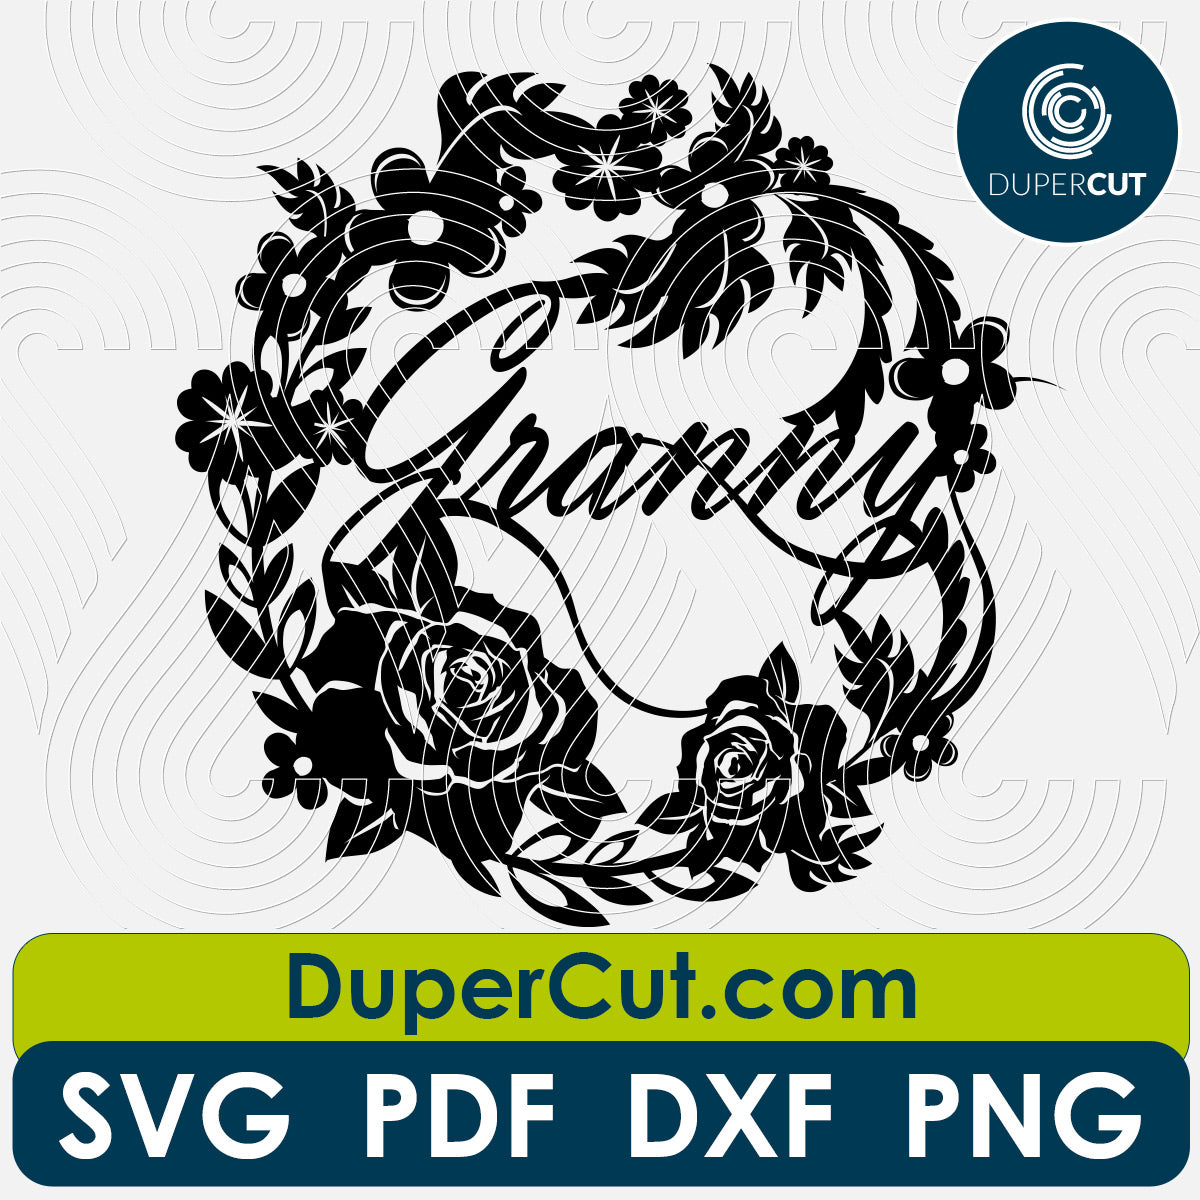 Granny floral wreath - SVG DXF vector files for cutting and engraving by DuperCut.com